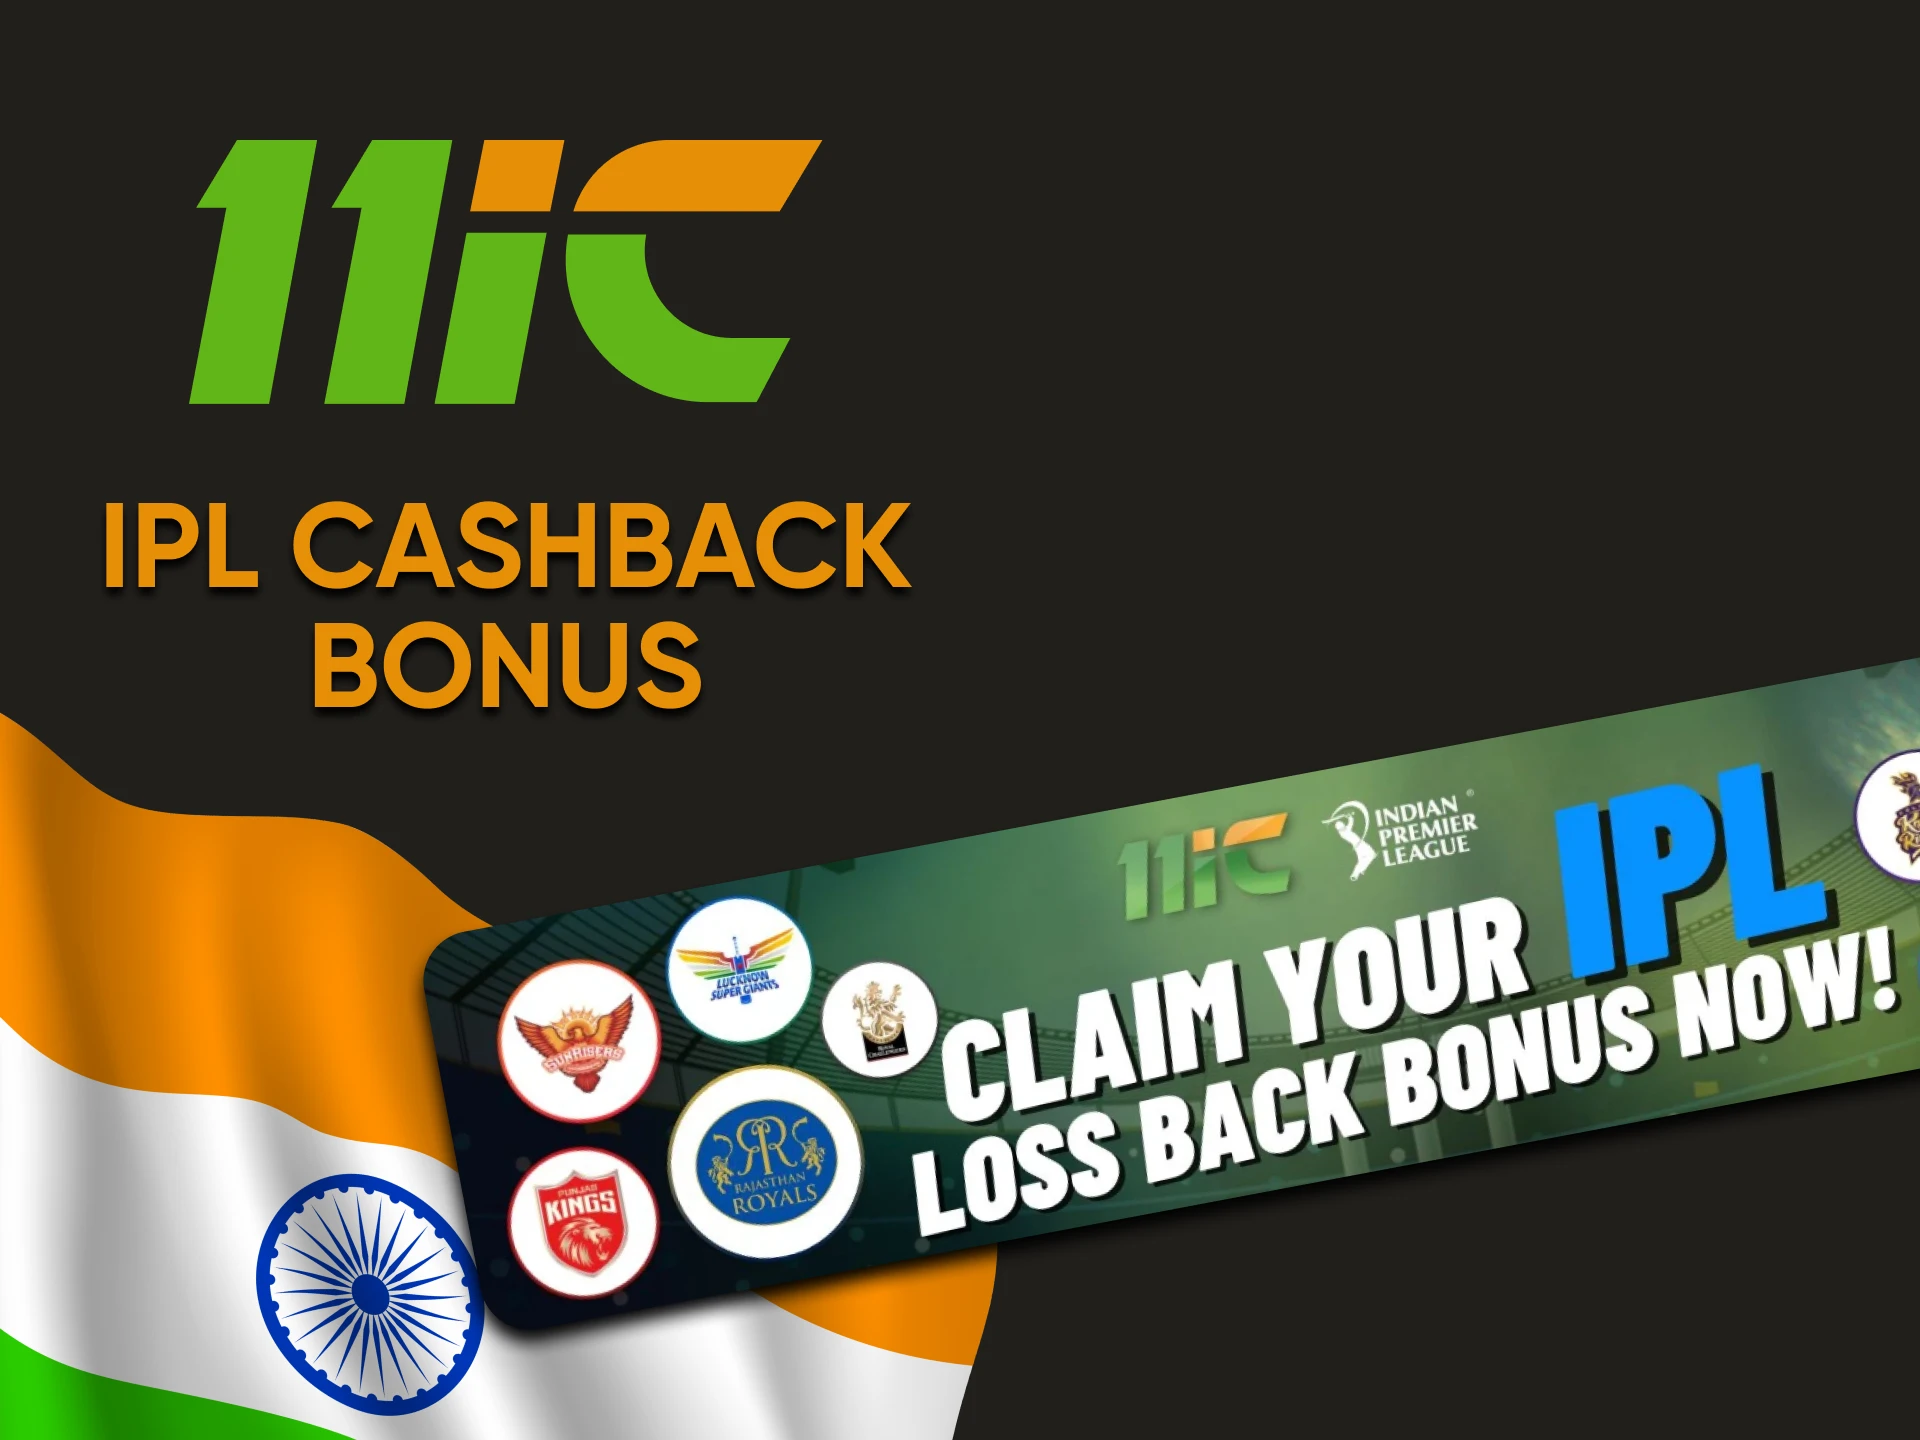 When you bet on IPL you get cashback from 11ic.